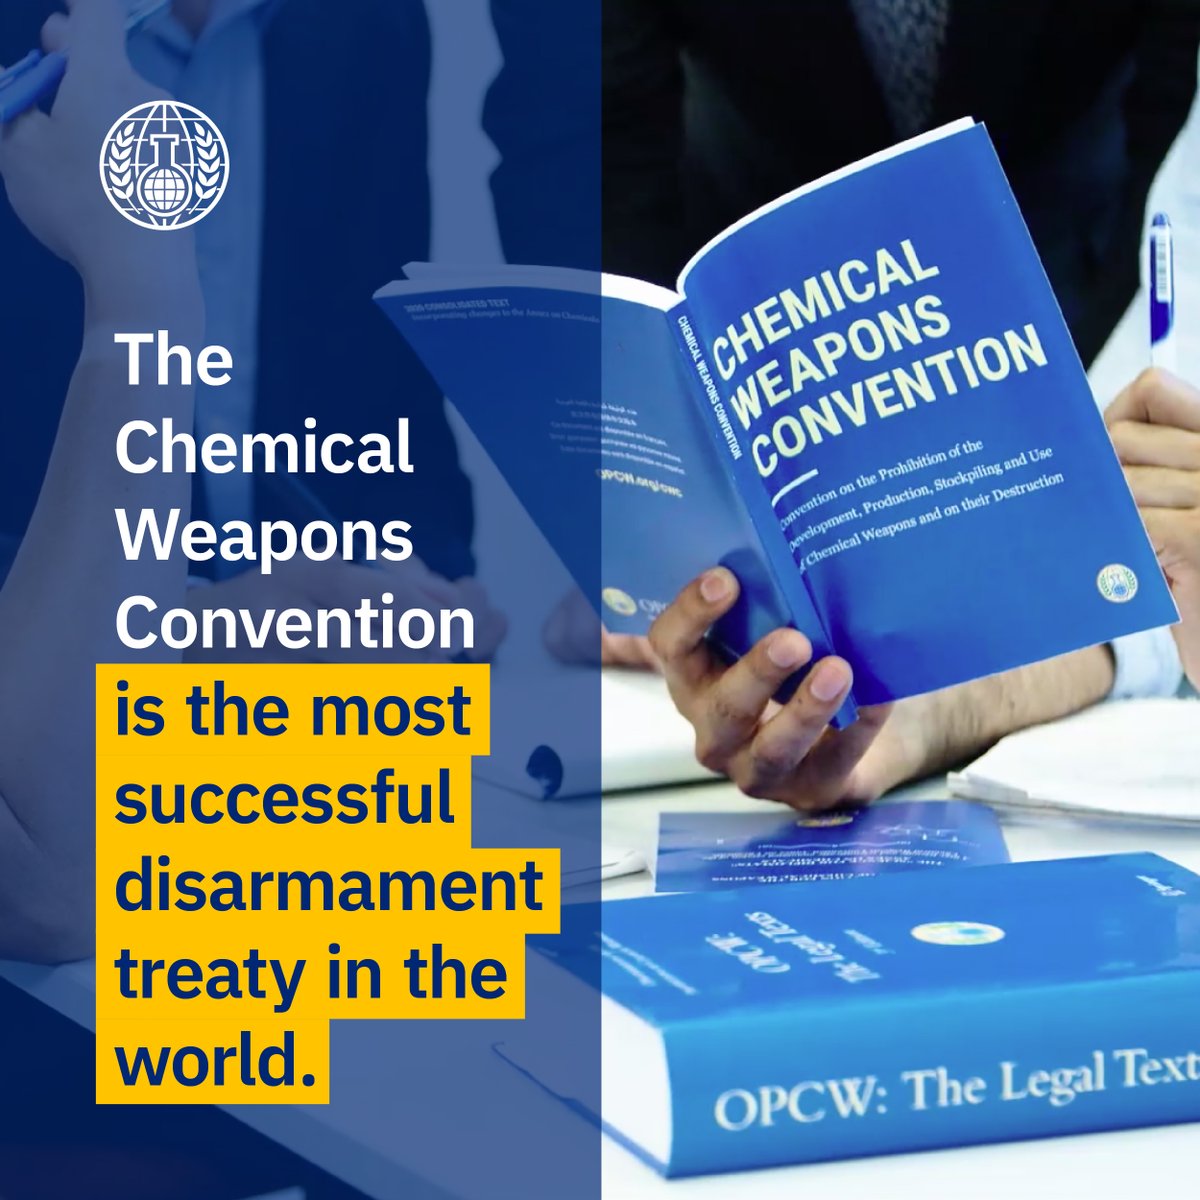 Today we celebrate the 25th anniversary of the #ChemicalWeaponsConvention entry into force 👏.  🇨🇦 has been a committed member of the #CWC since the start and is proud to be one of its 193 signatories. Together with the @OPCW we work to keep our 🌍 safe from #ChemicalWeapons. https://t.co/rMuSOTfkB4